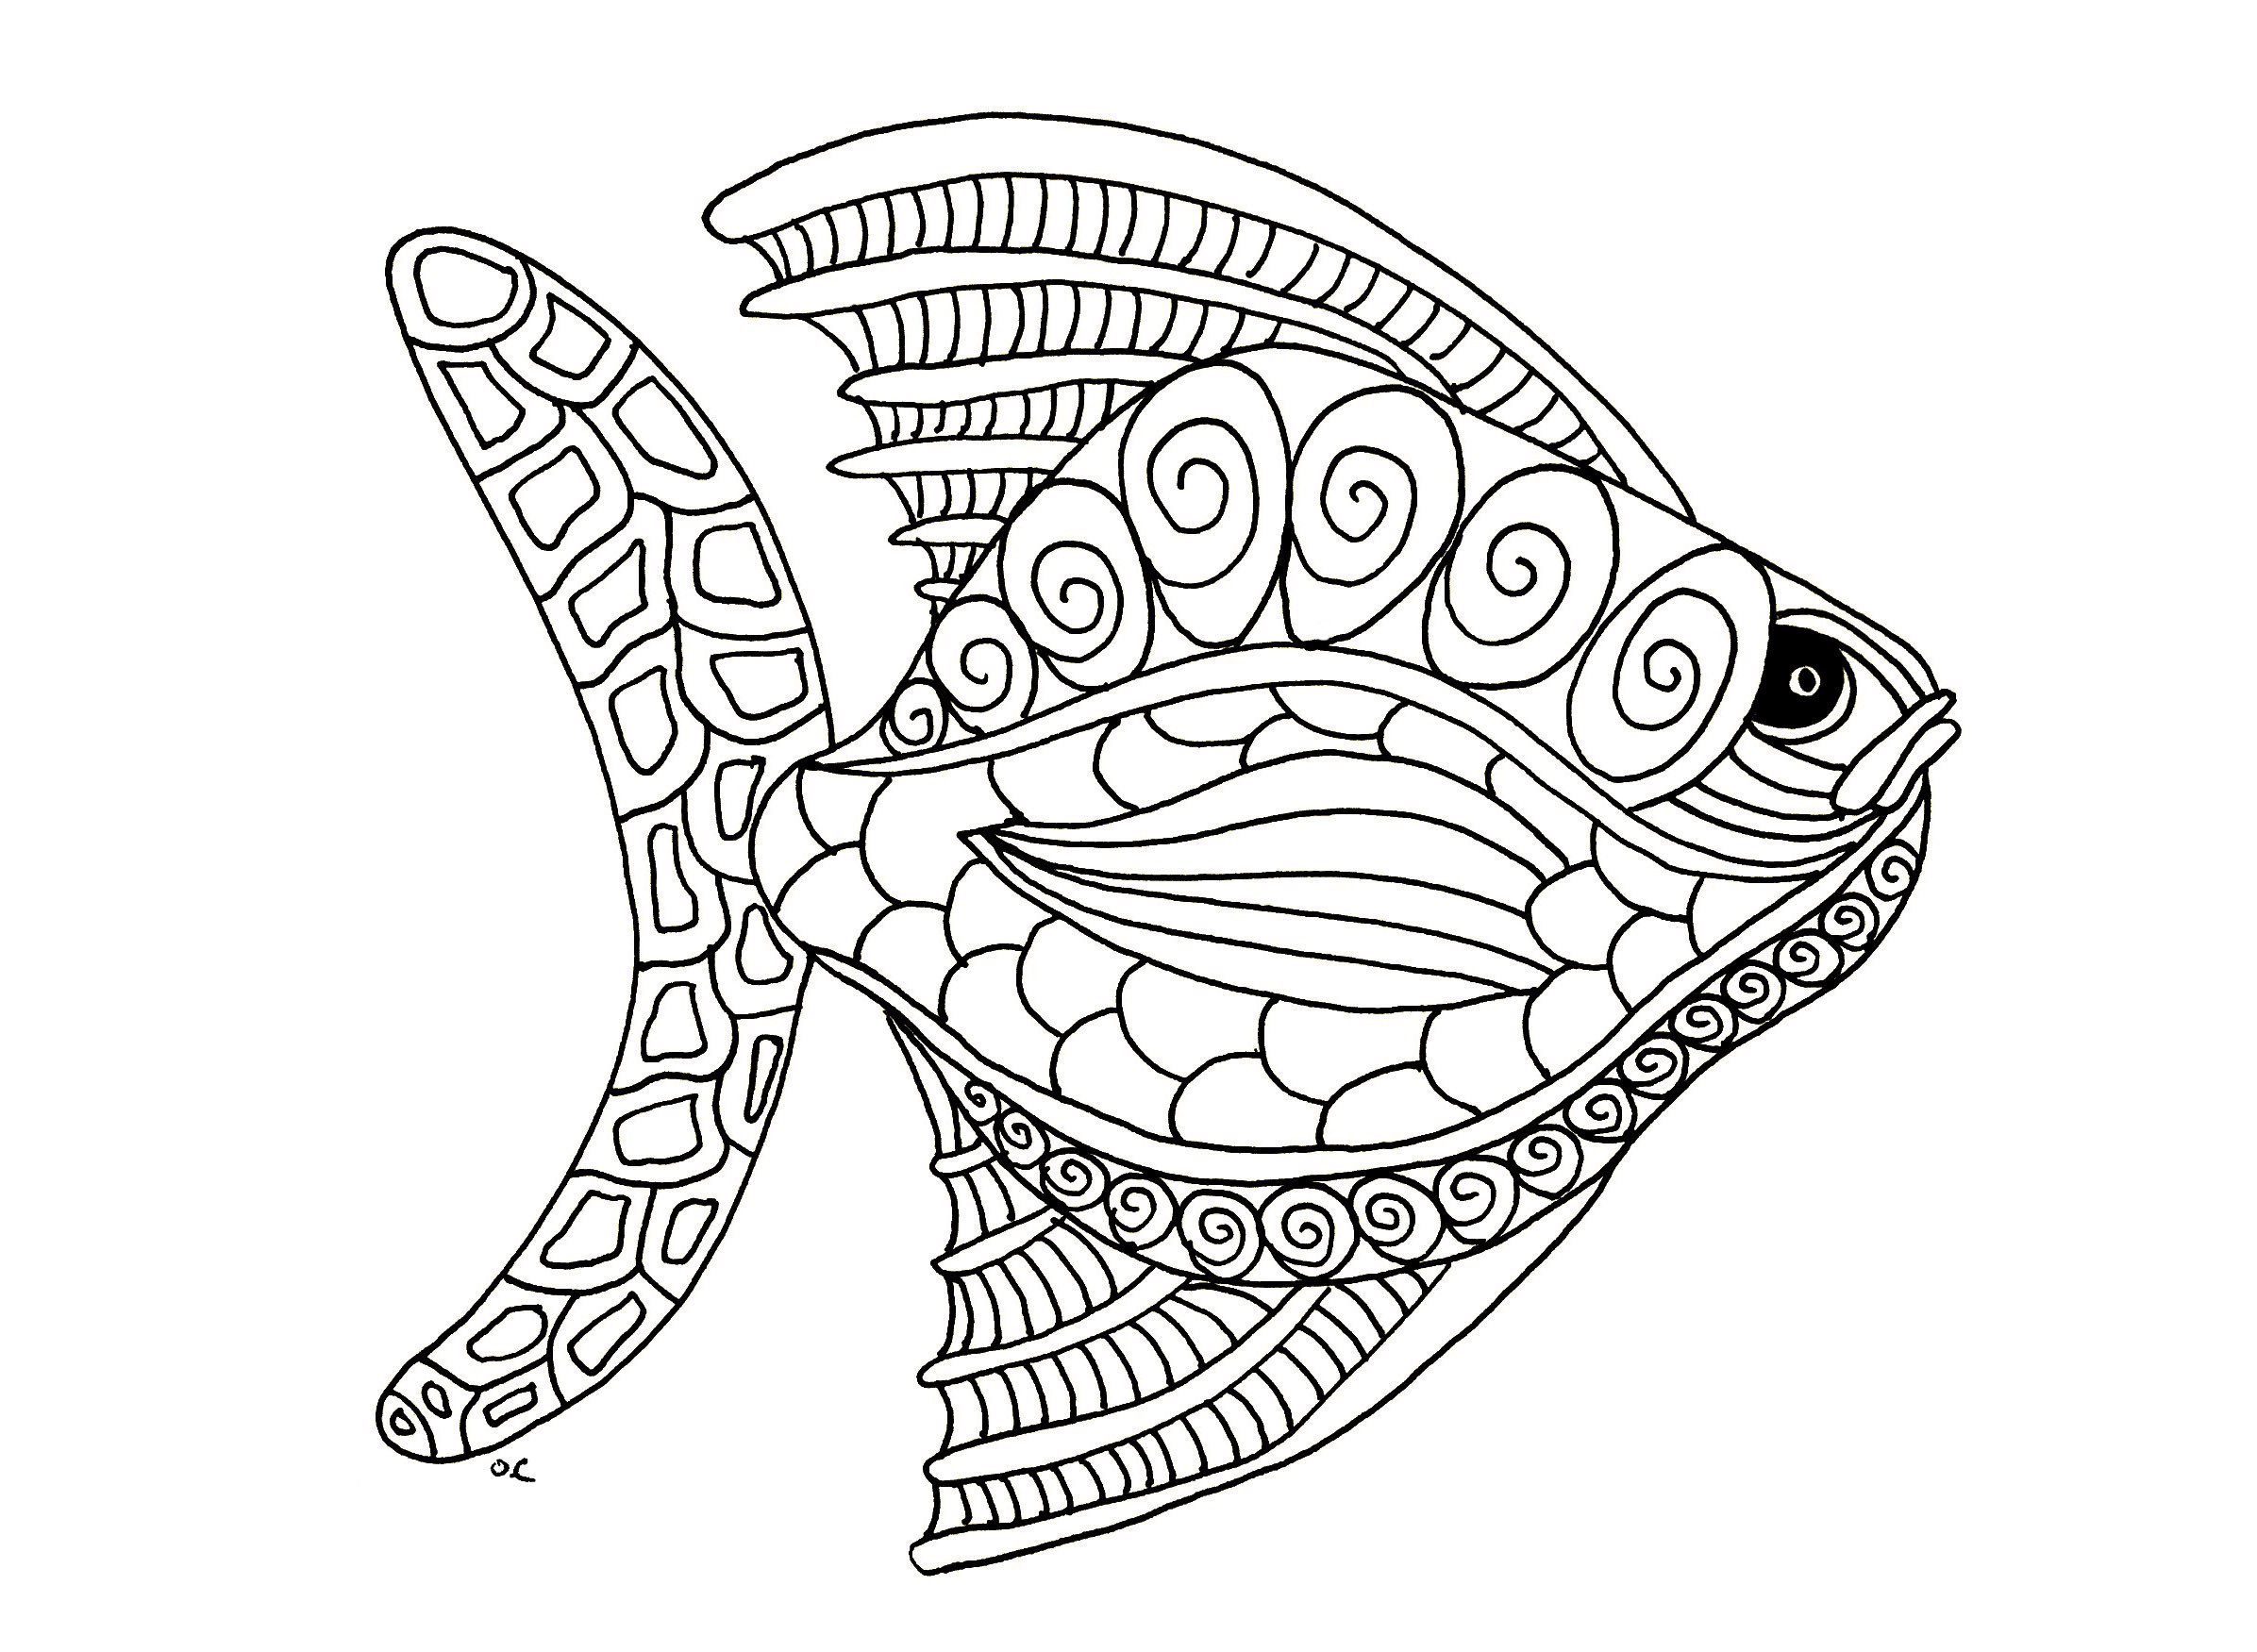 Printable Animal Coloring Pages For Adults
 Animal Coloring Pages for Adults Best Coloring Pages For